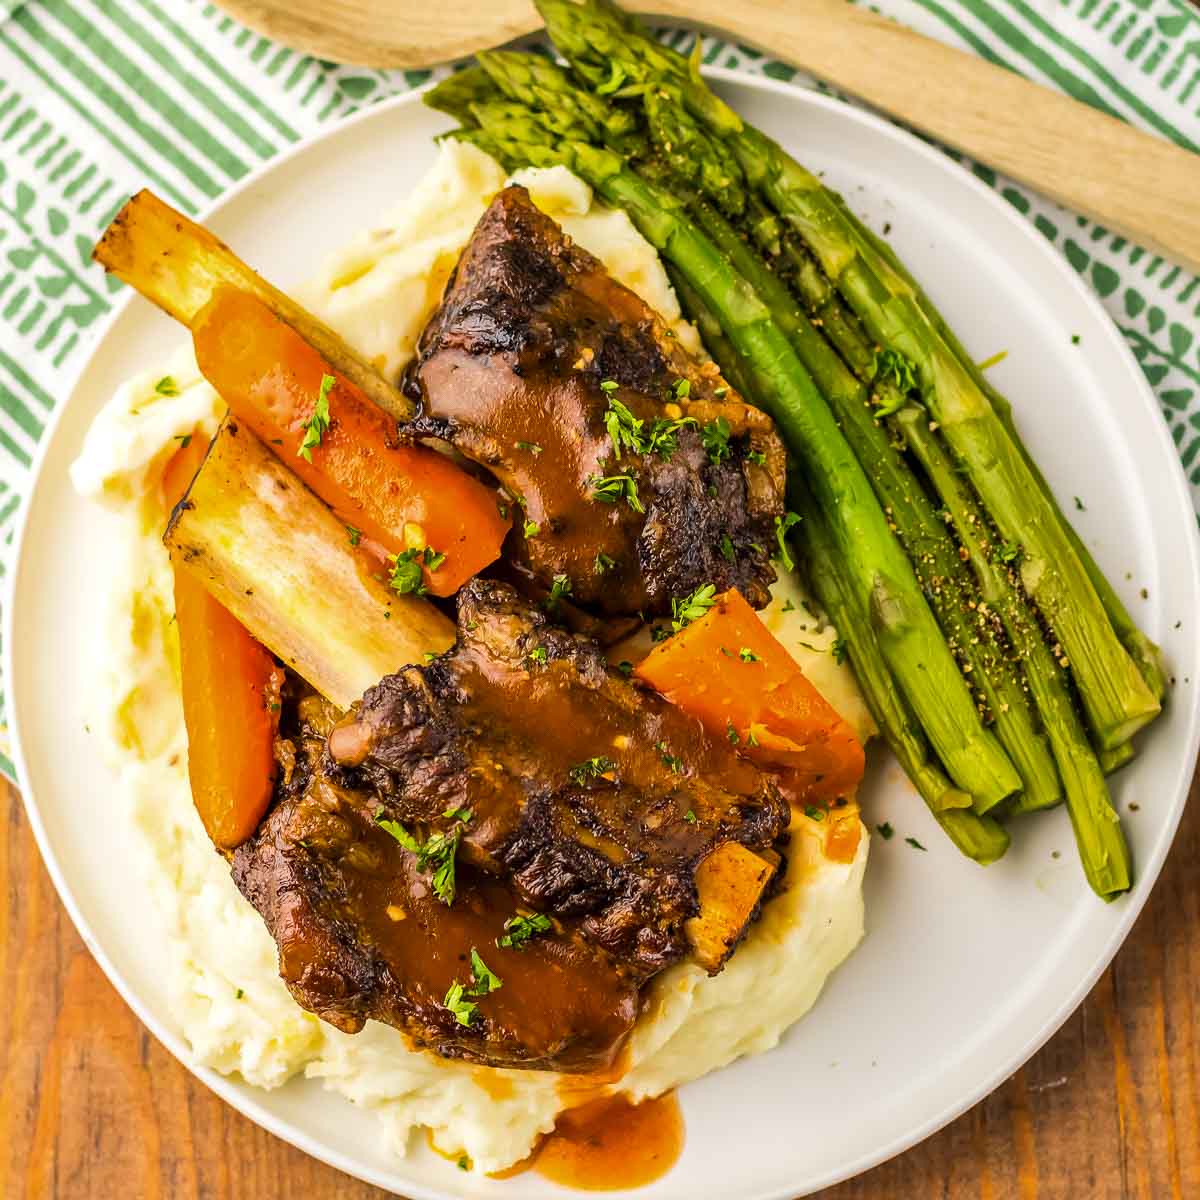 A slow cooker full of short ribs and vegetables.